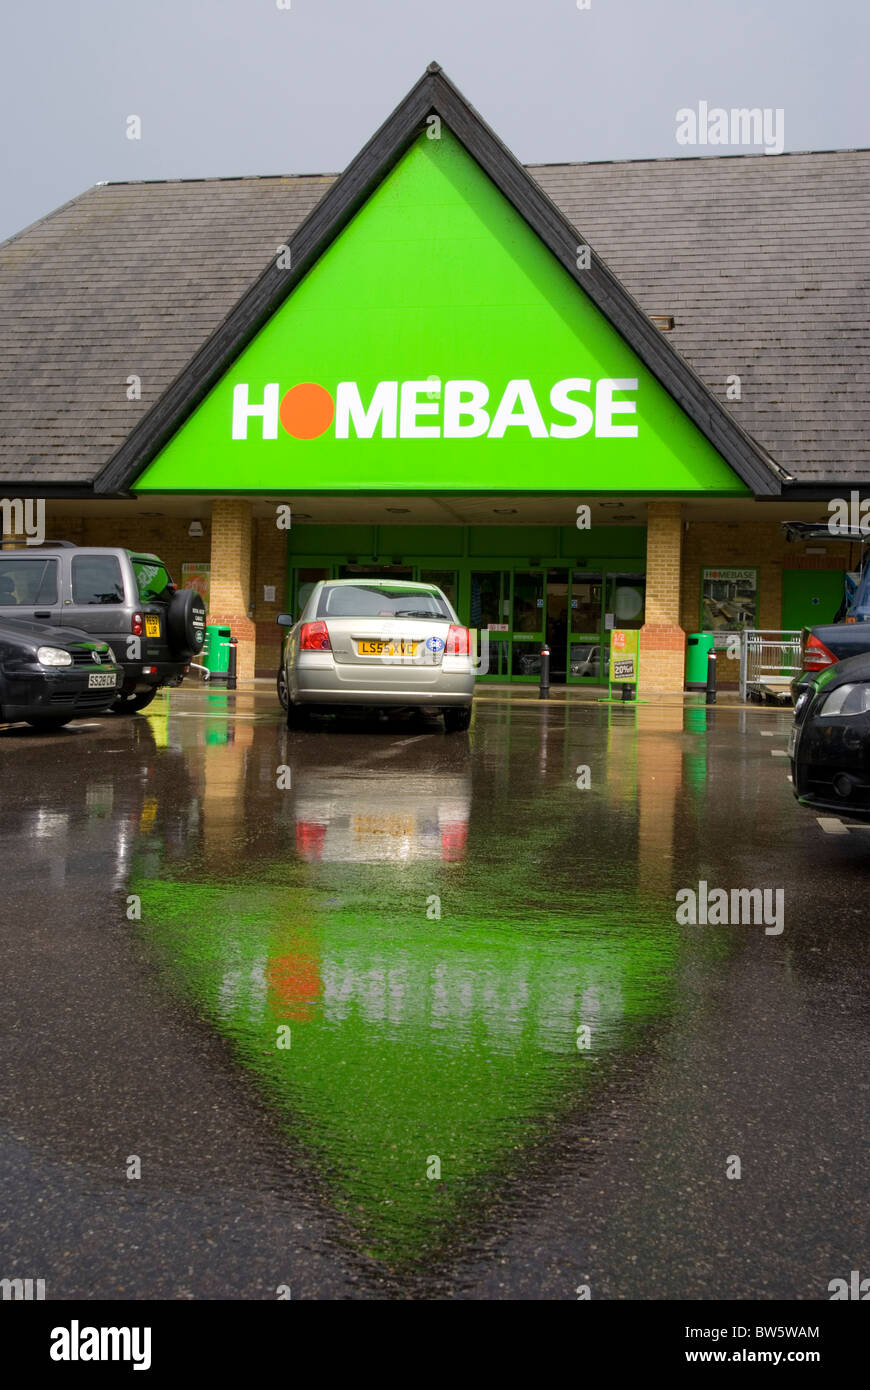 Homebase Diy Superstore Architectural Detail Stock Photo